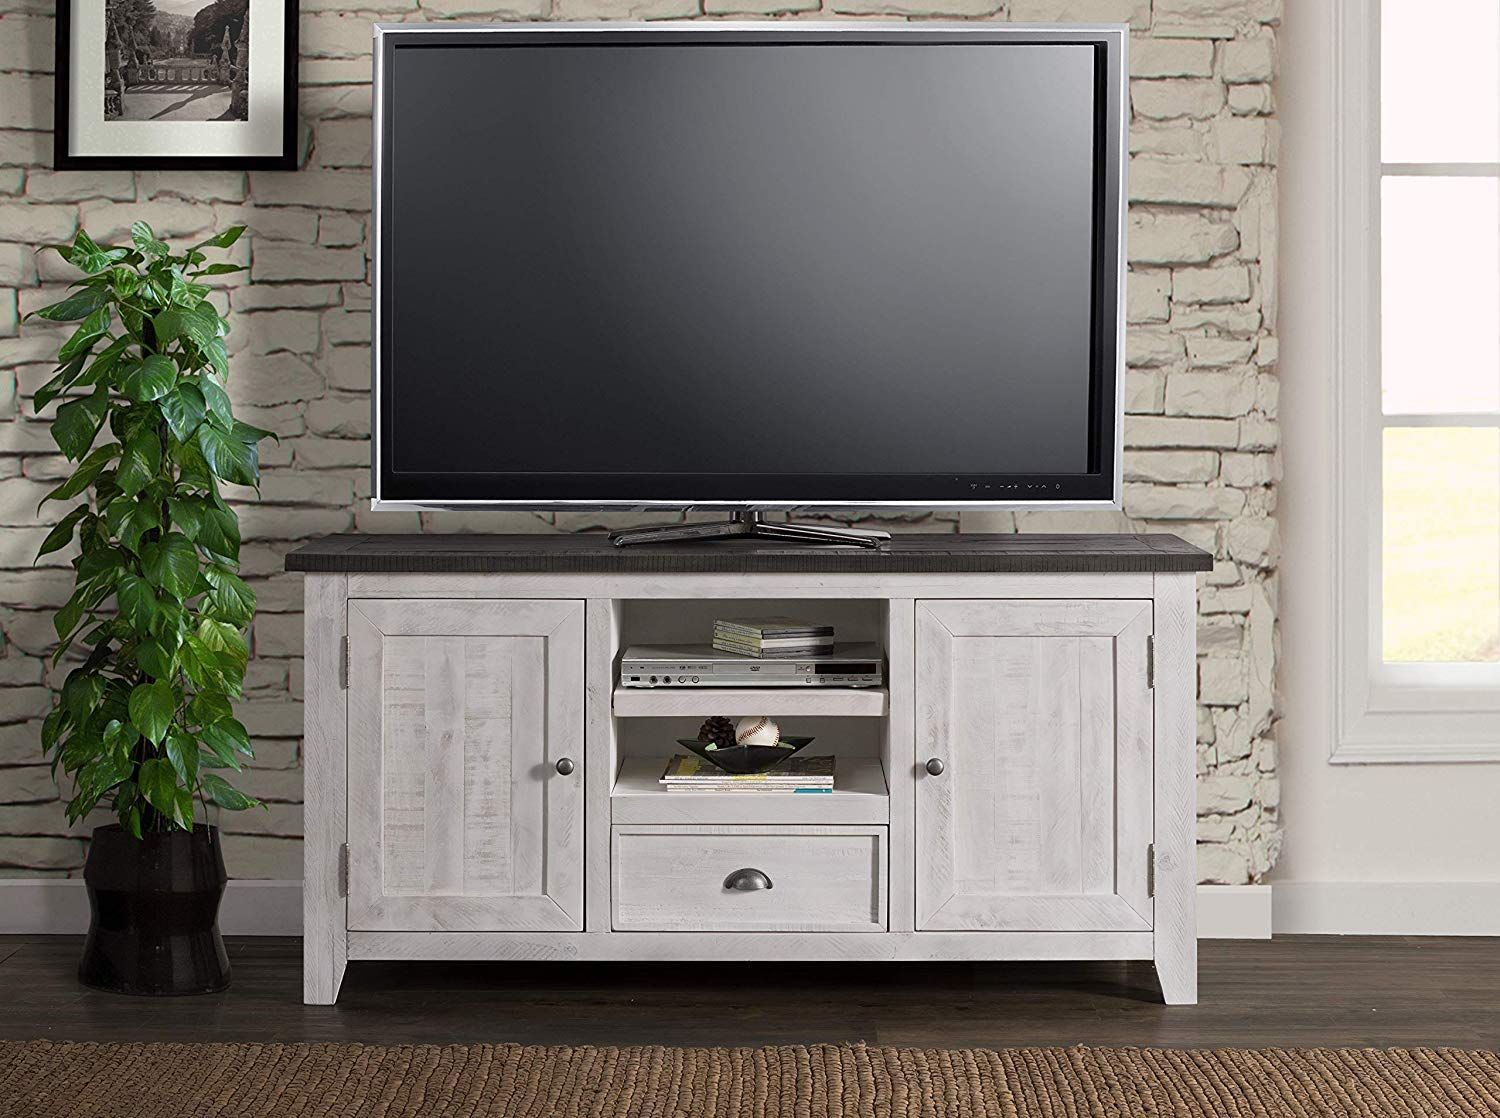 Farmhouse Tv Stand: Cozy And Functional Entertainment Centers – Farmhouse  Goals | Farmhouse Tv Stand, Rustic Tv Stand, Solid Wood Tv Stand Regarding Farmhouse Tv Stands (Photo 7 of 15)